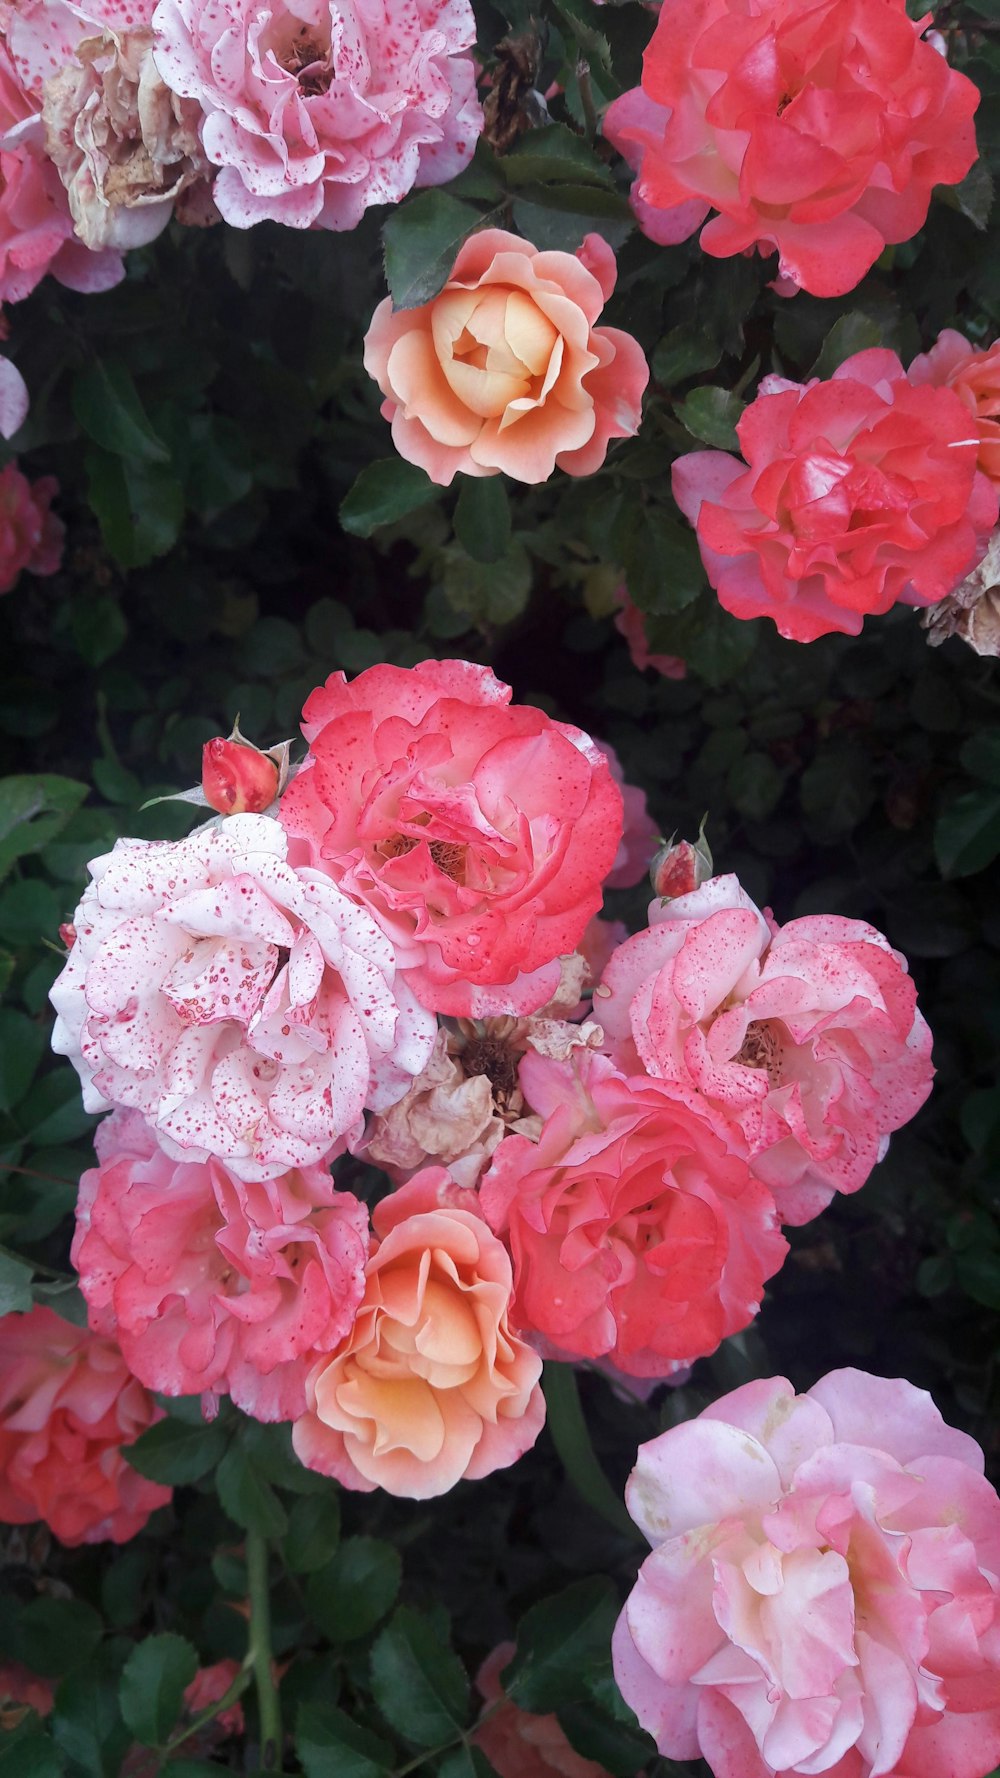 pink and white roses in bloom during daytime